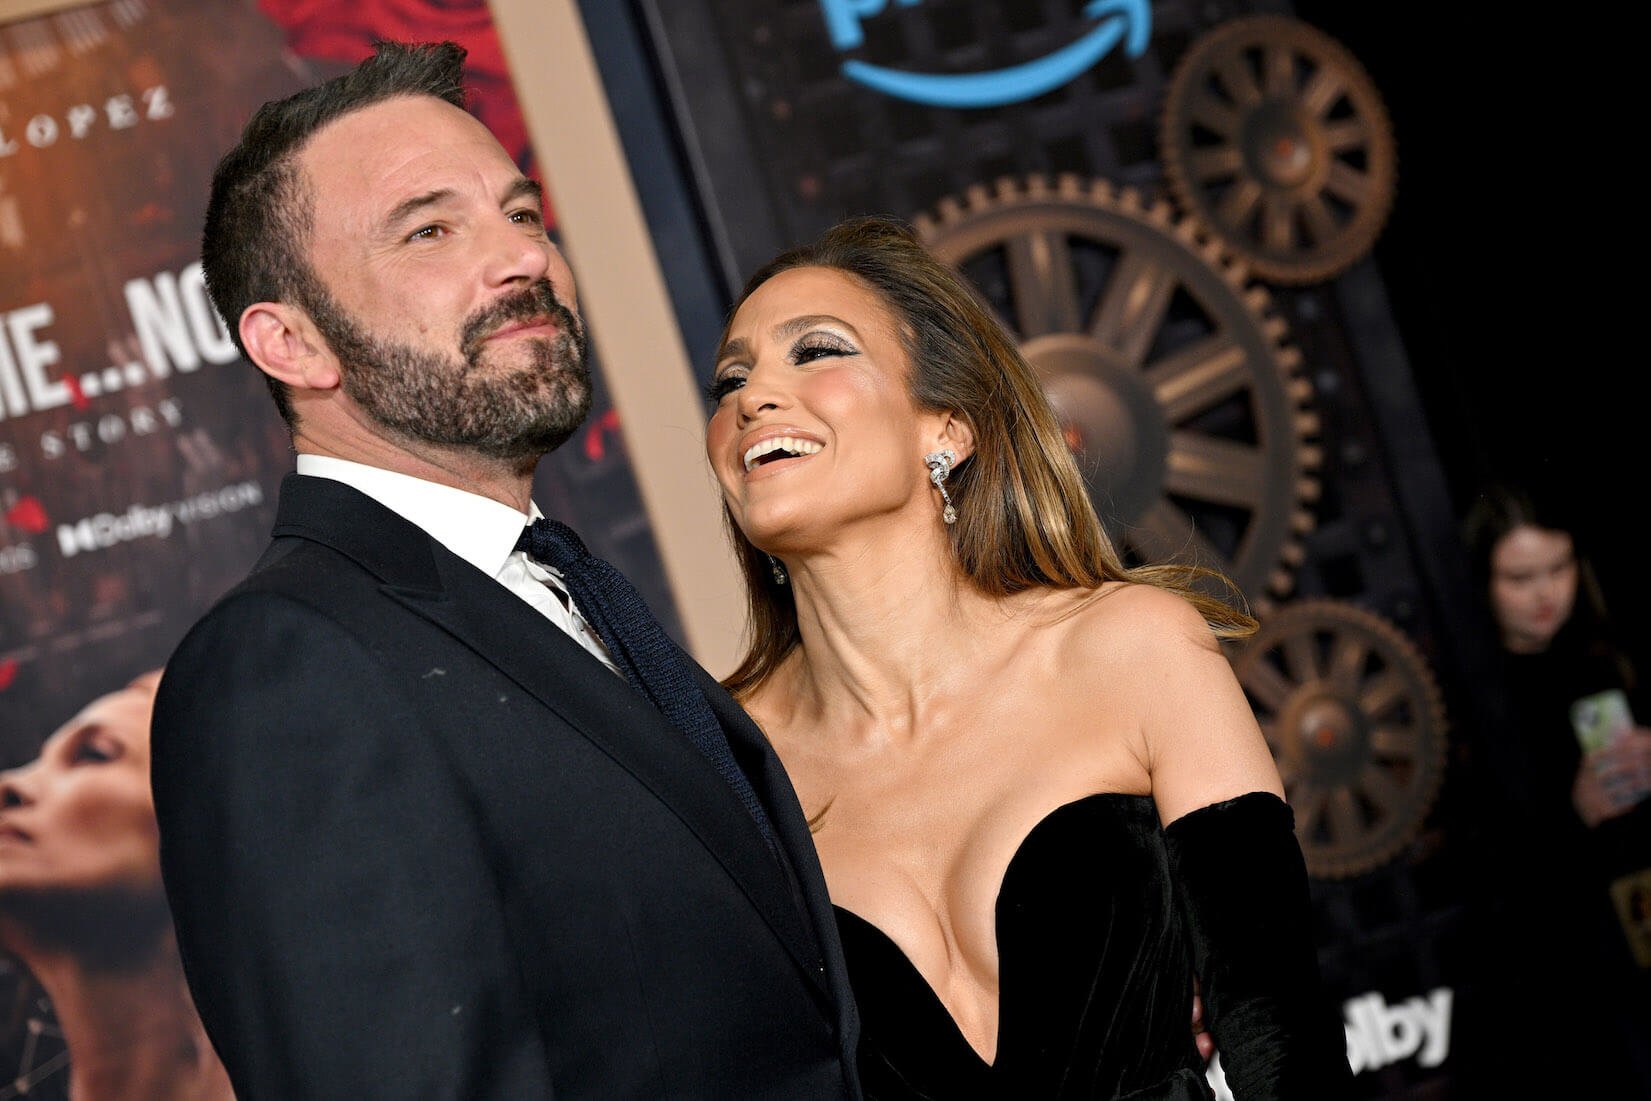 Jennifer Lopez smiling and looking up at Ben Affleck at the premiere of 'This Is Me ... Now: A Love Story' in February 2024